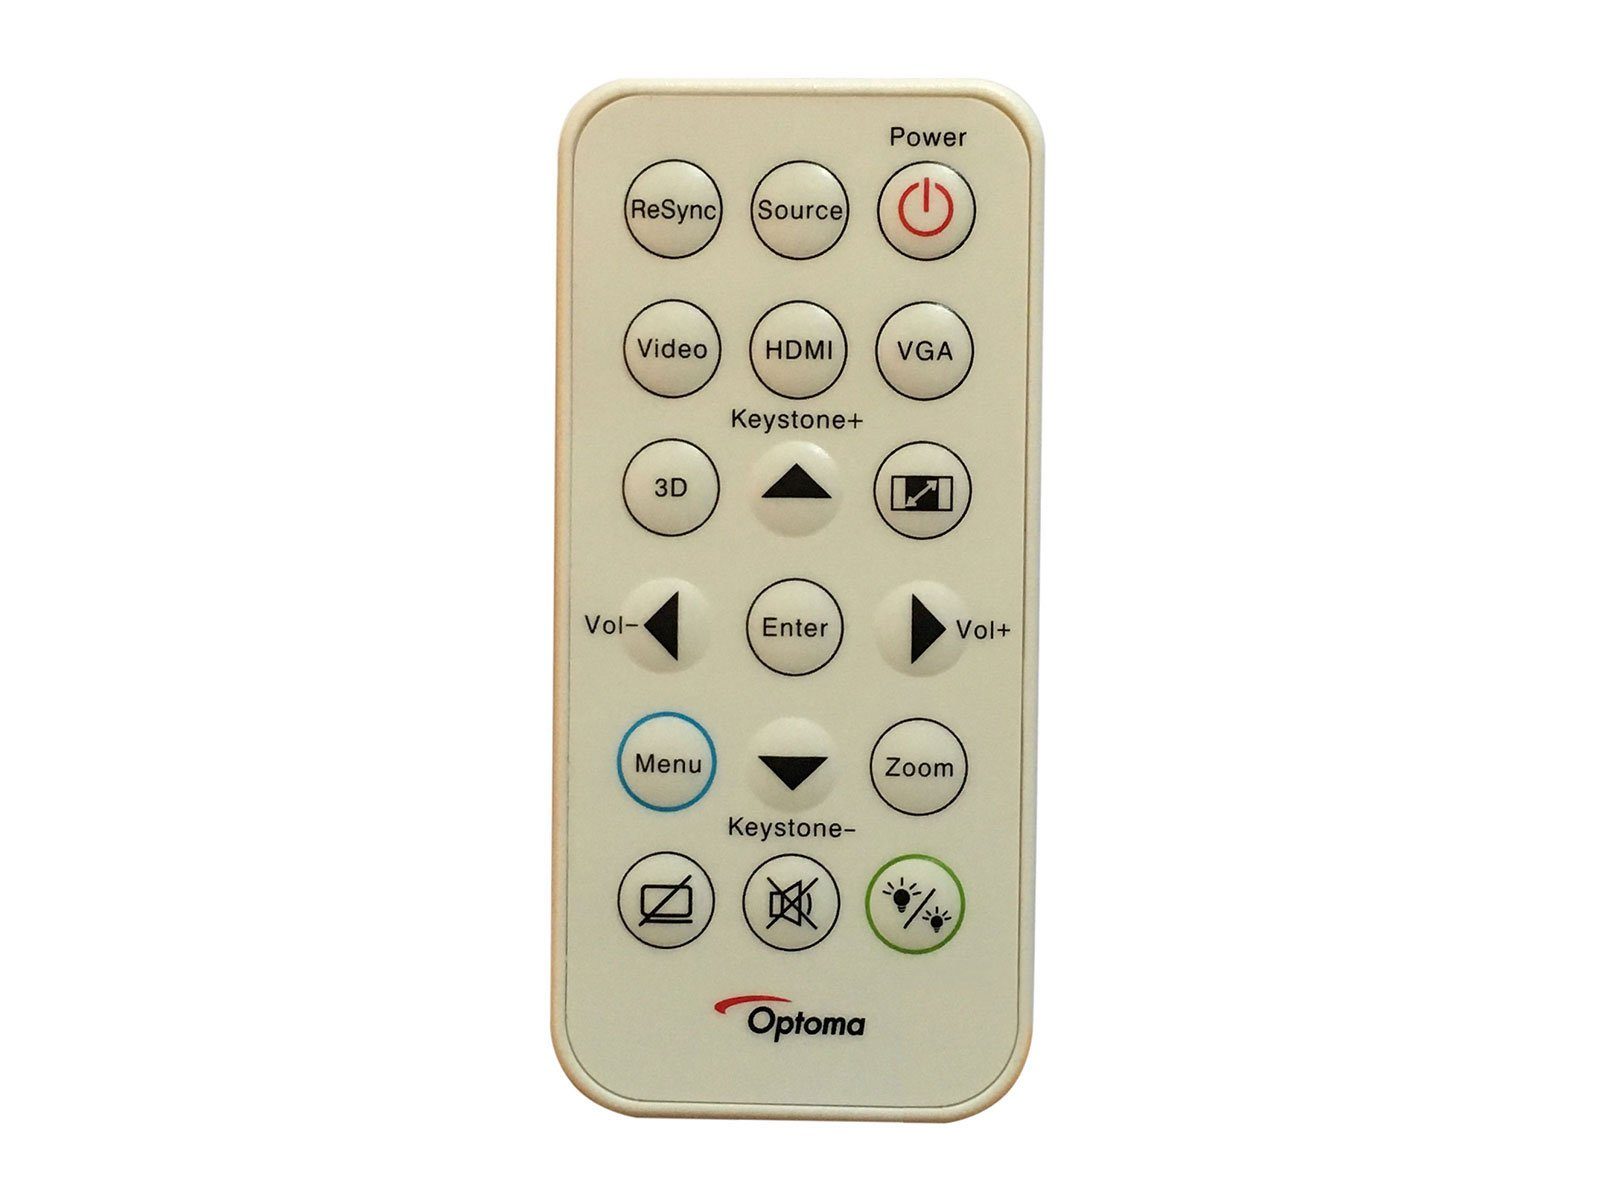 W312 DW346 W316 X312 S316 S310e HD39HDR S315 H182X X315 DS346 DS344 DX345 HD28HDR INTECHING SP.8VH02GC01 Projector Remote Control for Optoma DAESSGN H112e DX346 X316 W310 